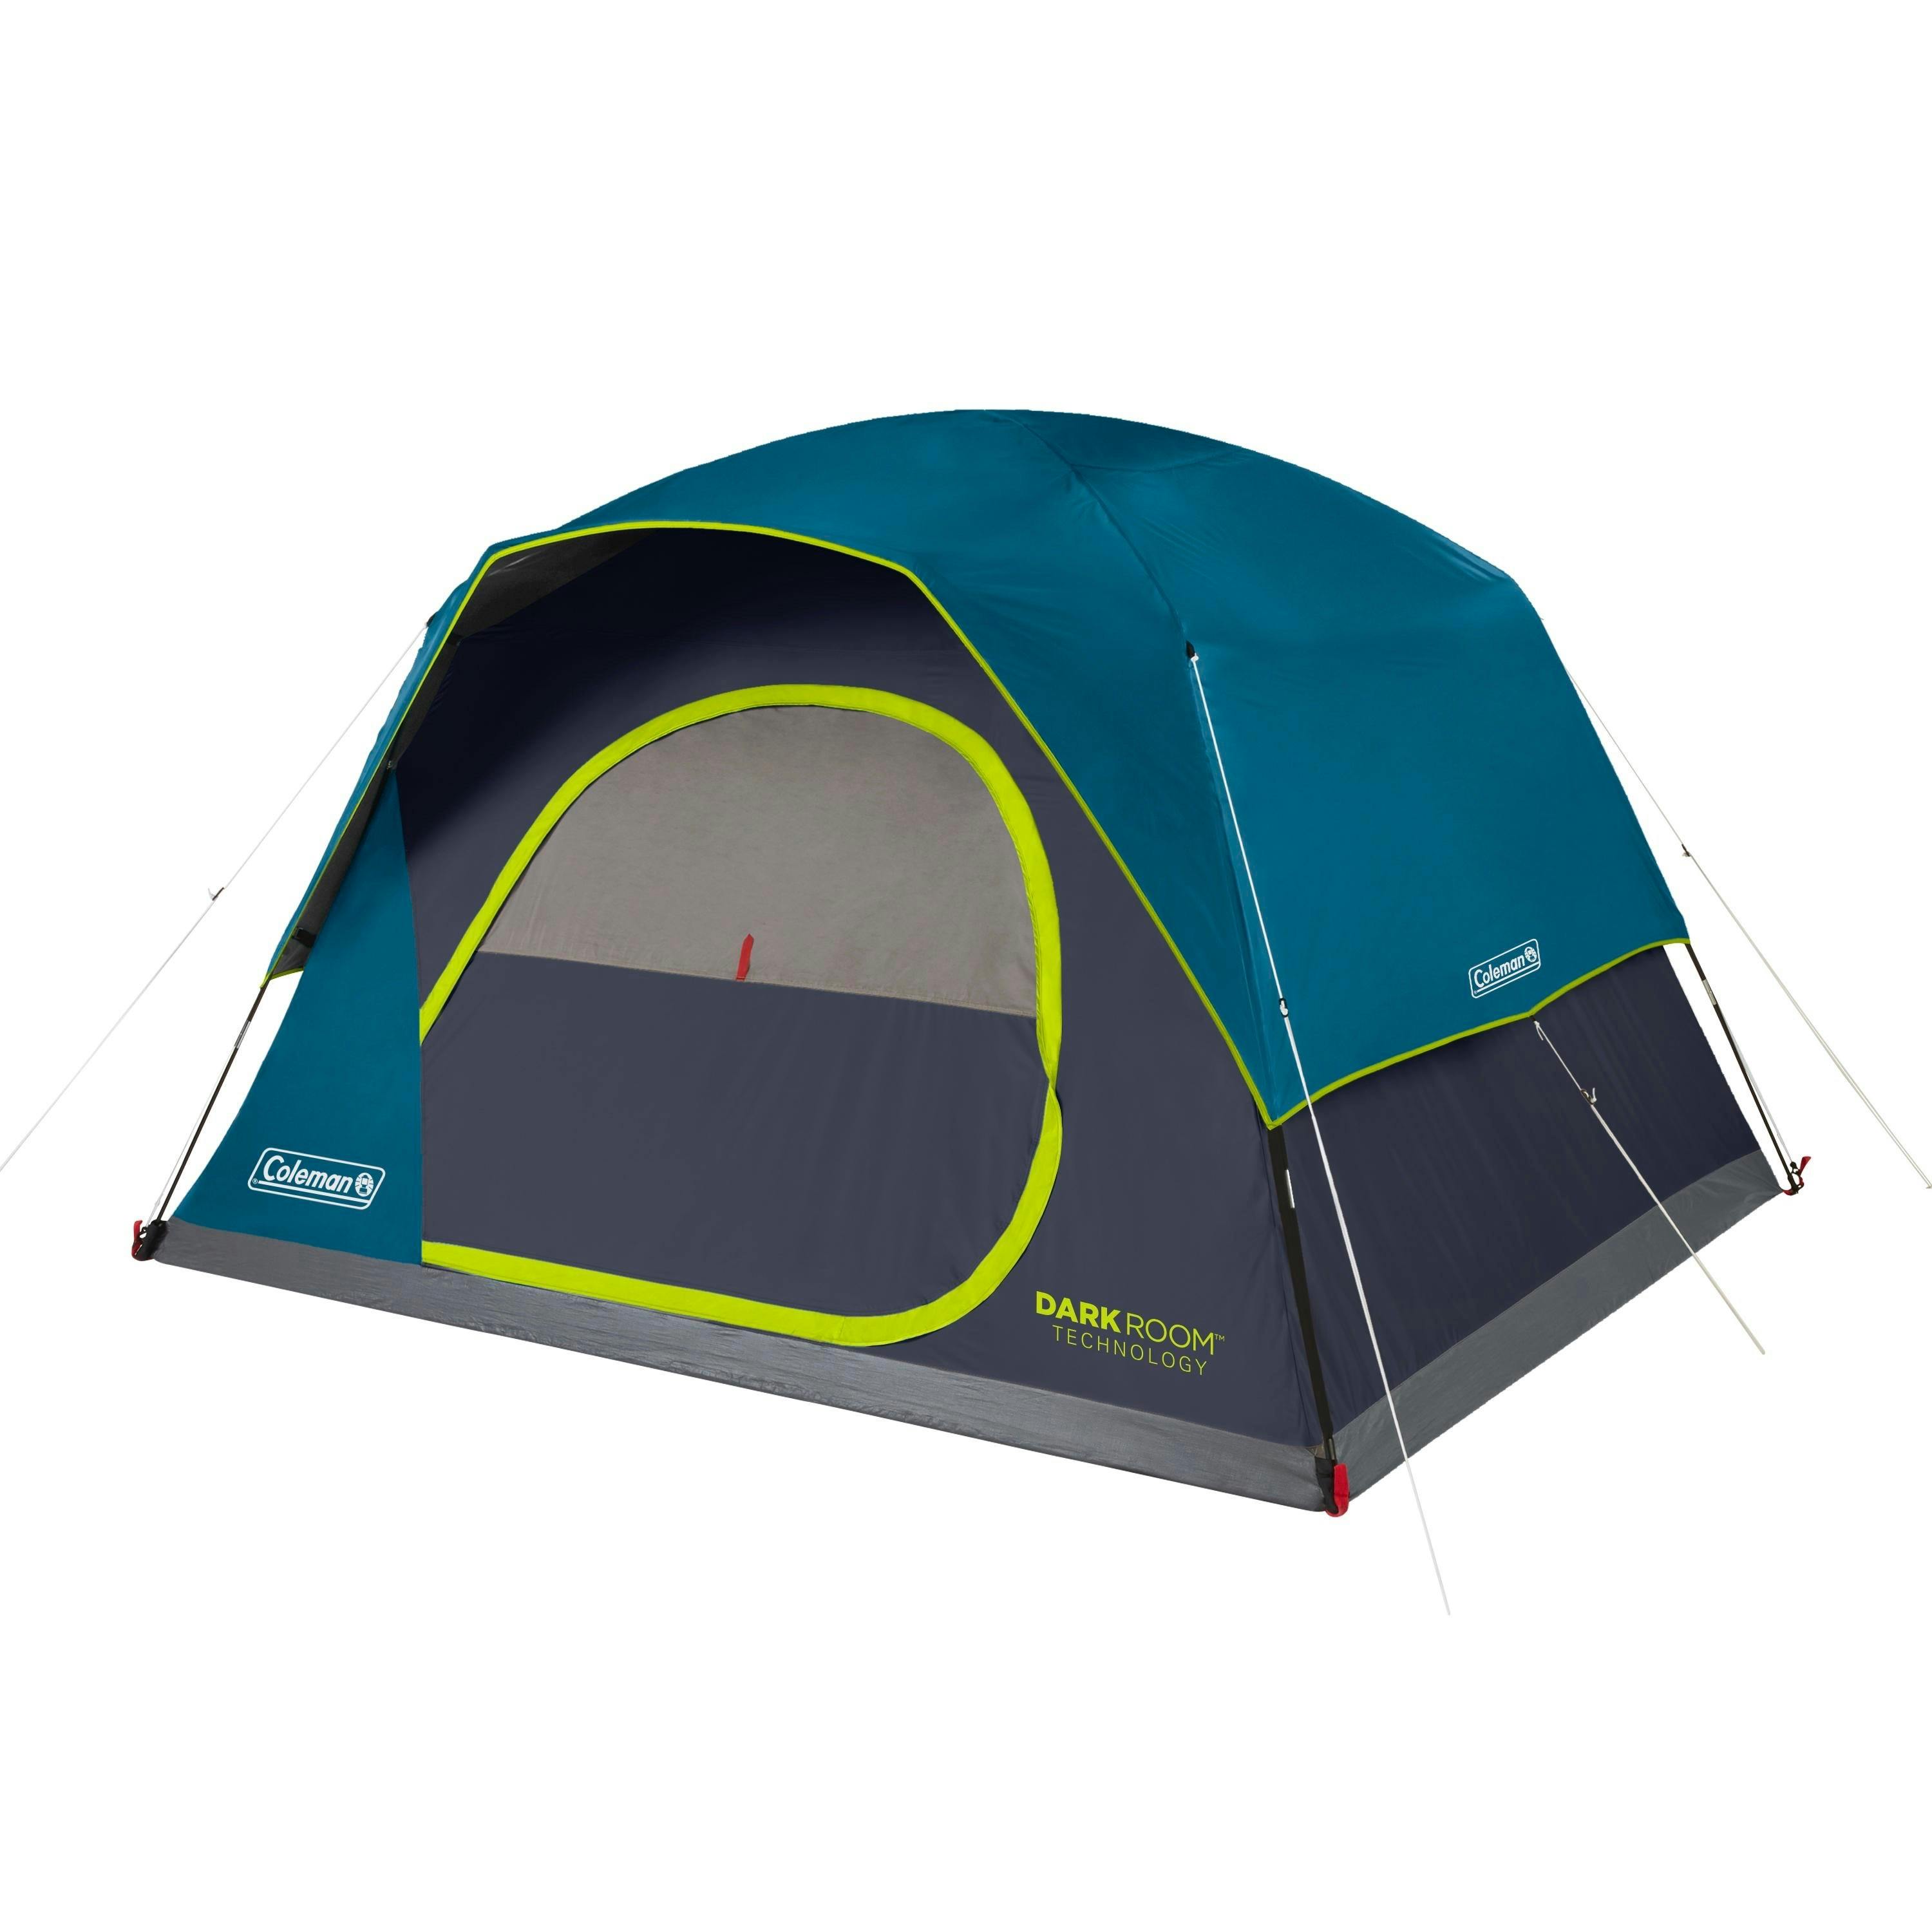 Coleman Skydome™ Camping Tent with Dark Room Technology · 6 Person